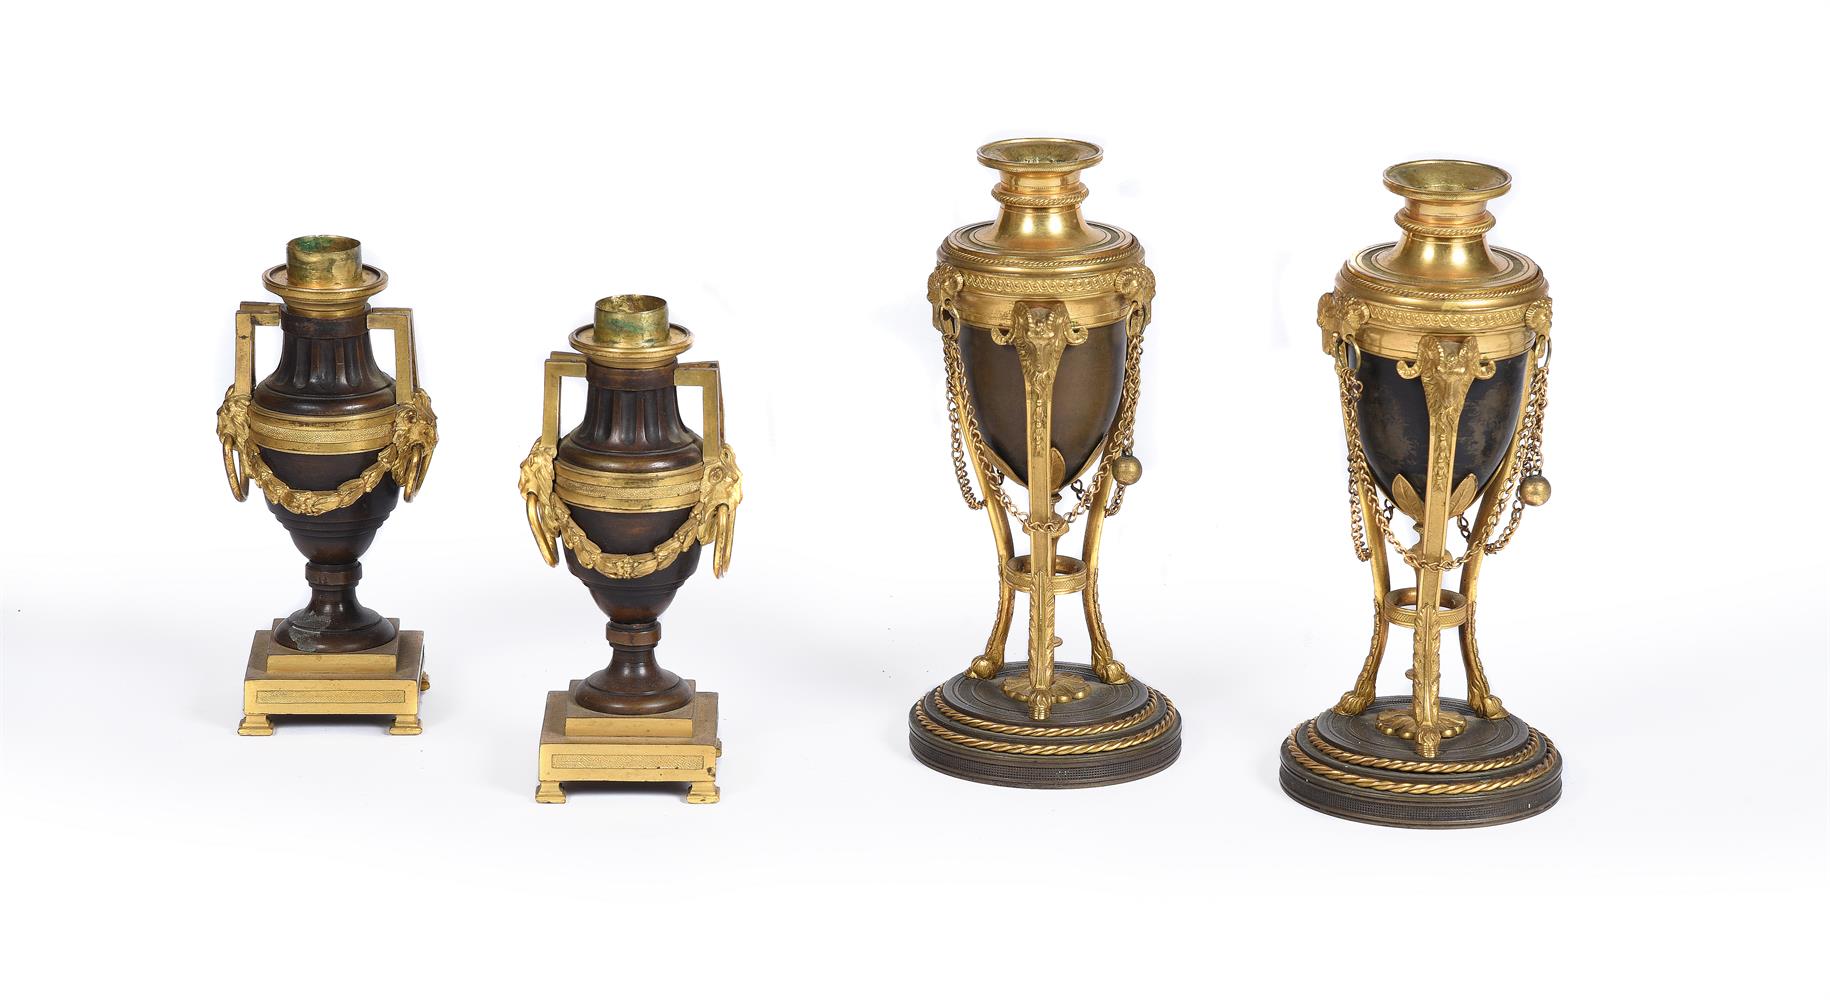 TWO PAIRS OF BRONZE AND ORMOLU CASSOLETTES, FIRST PAIR POSSIBLY ENGLISH, EARLY 19TH CENTURY - Image 3 of 5